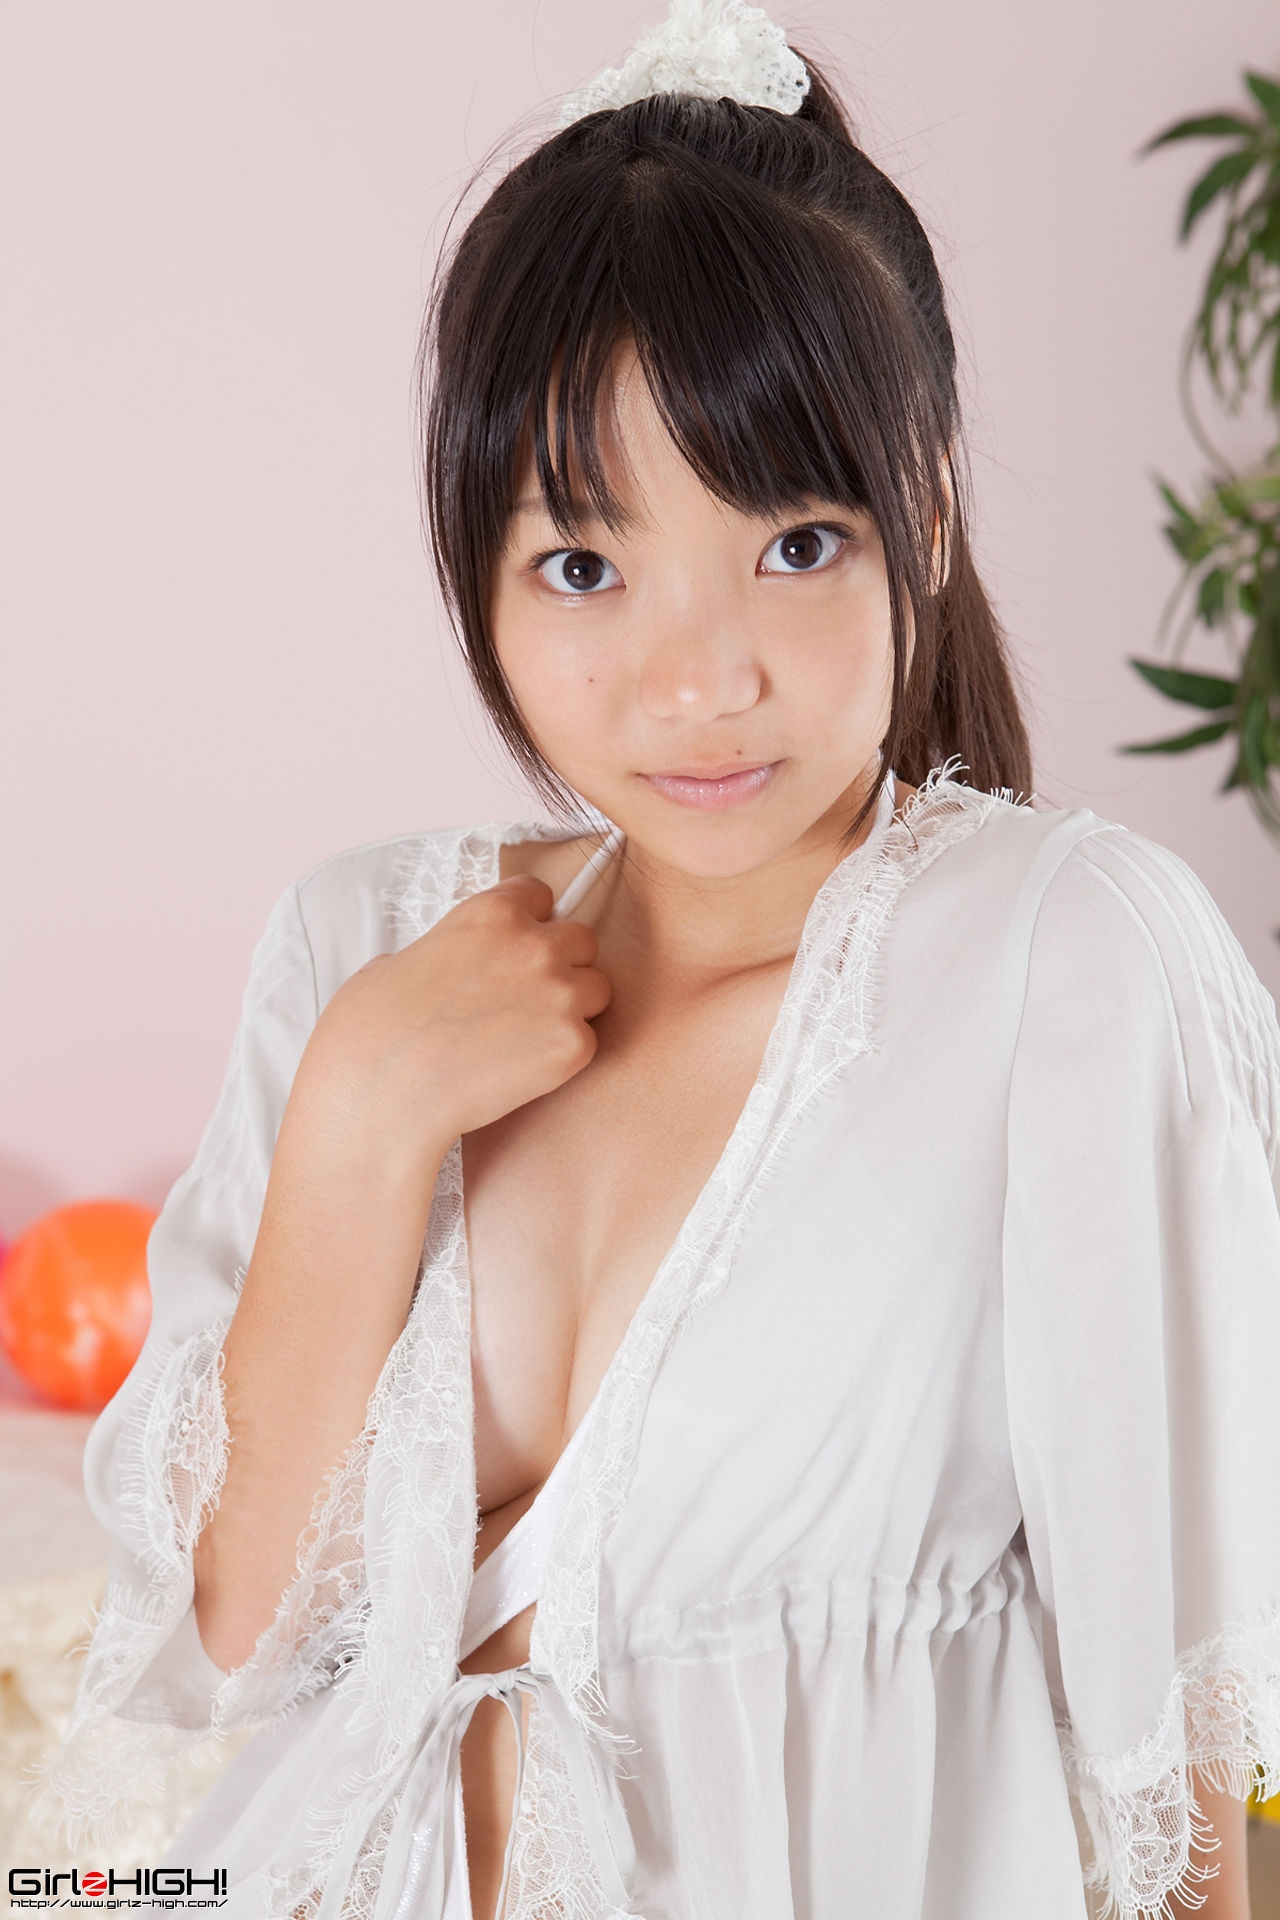 [Girlz-High] 西浜ふうか - 薄纱美少女 Special Gravure (STAGE1) 3.4 